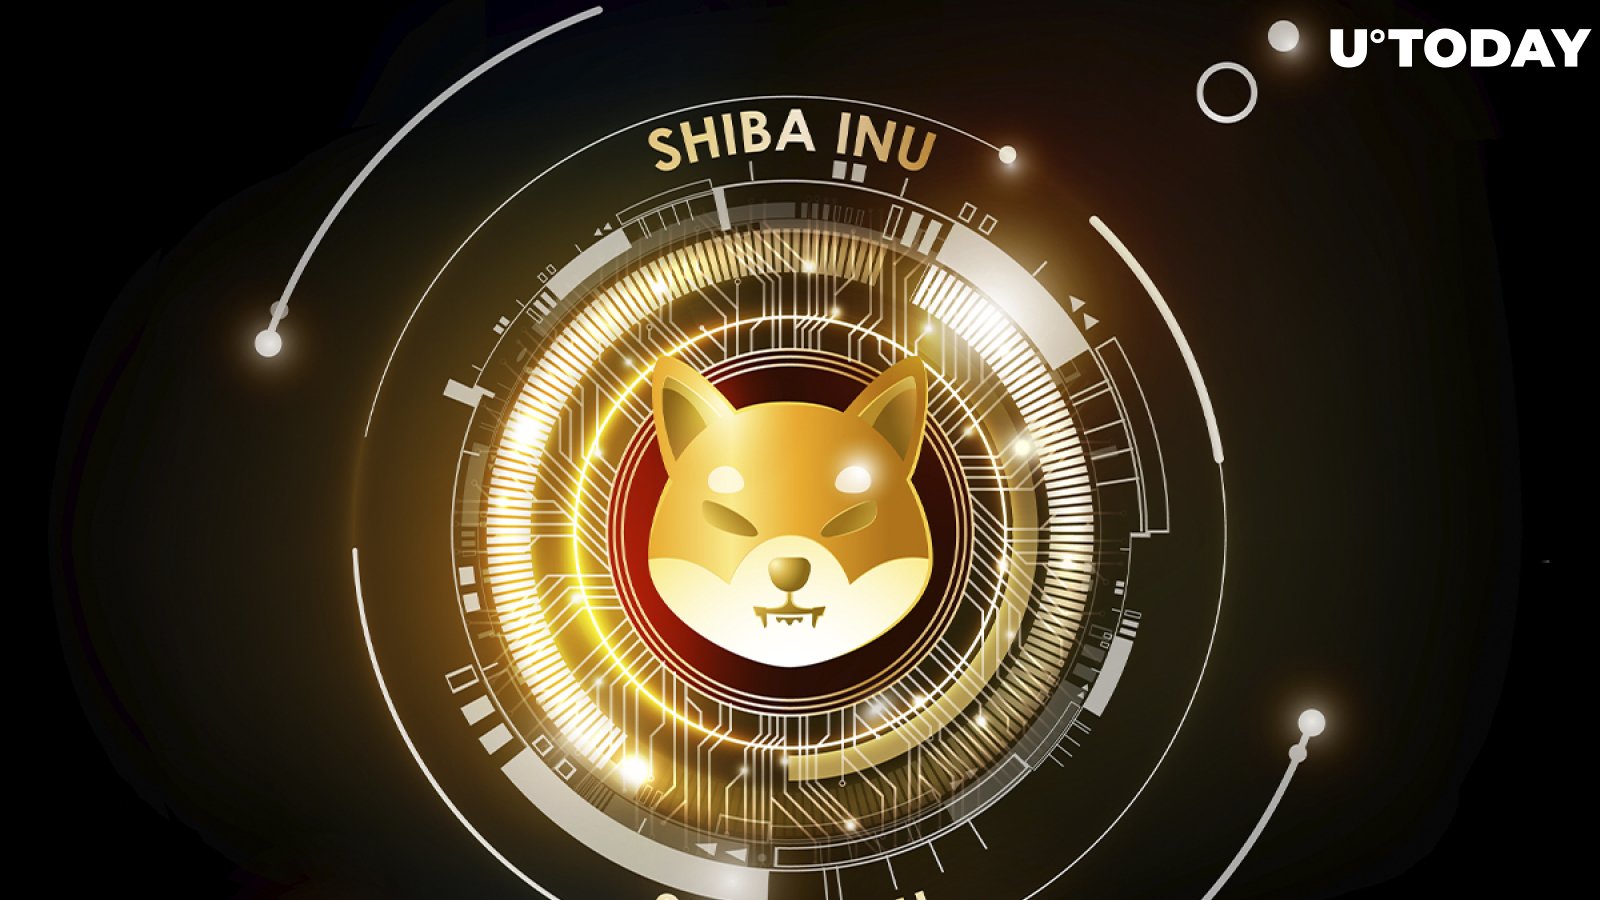 Shiba Inu (SHIB) Hits New All-Time High, Becomes Most Traded Cryptocurrency on Coinbase